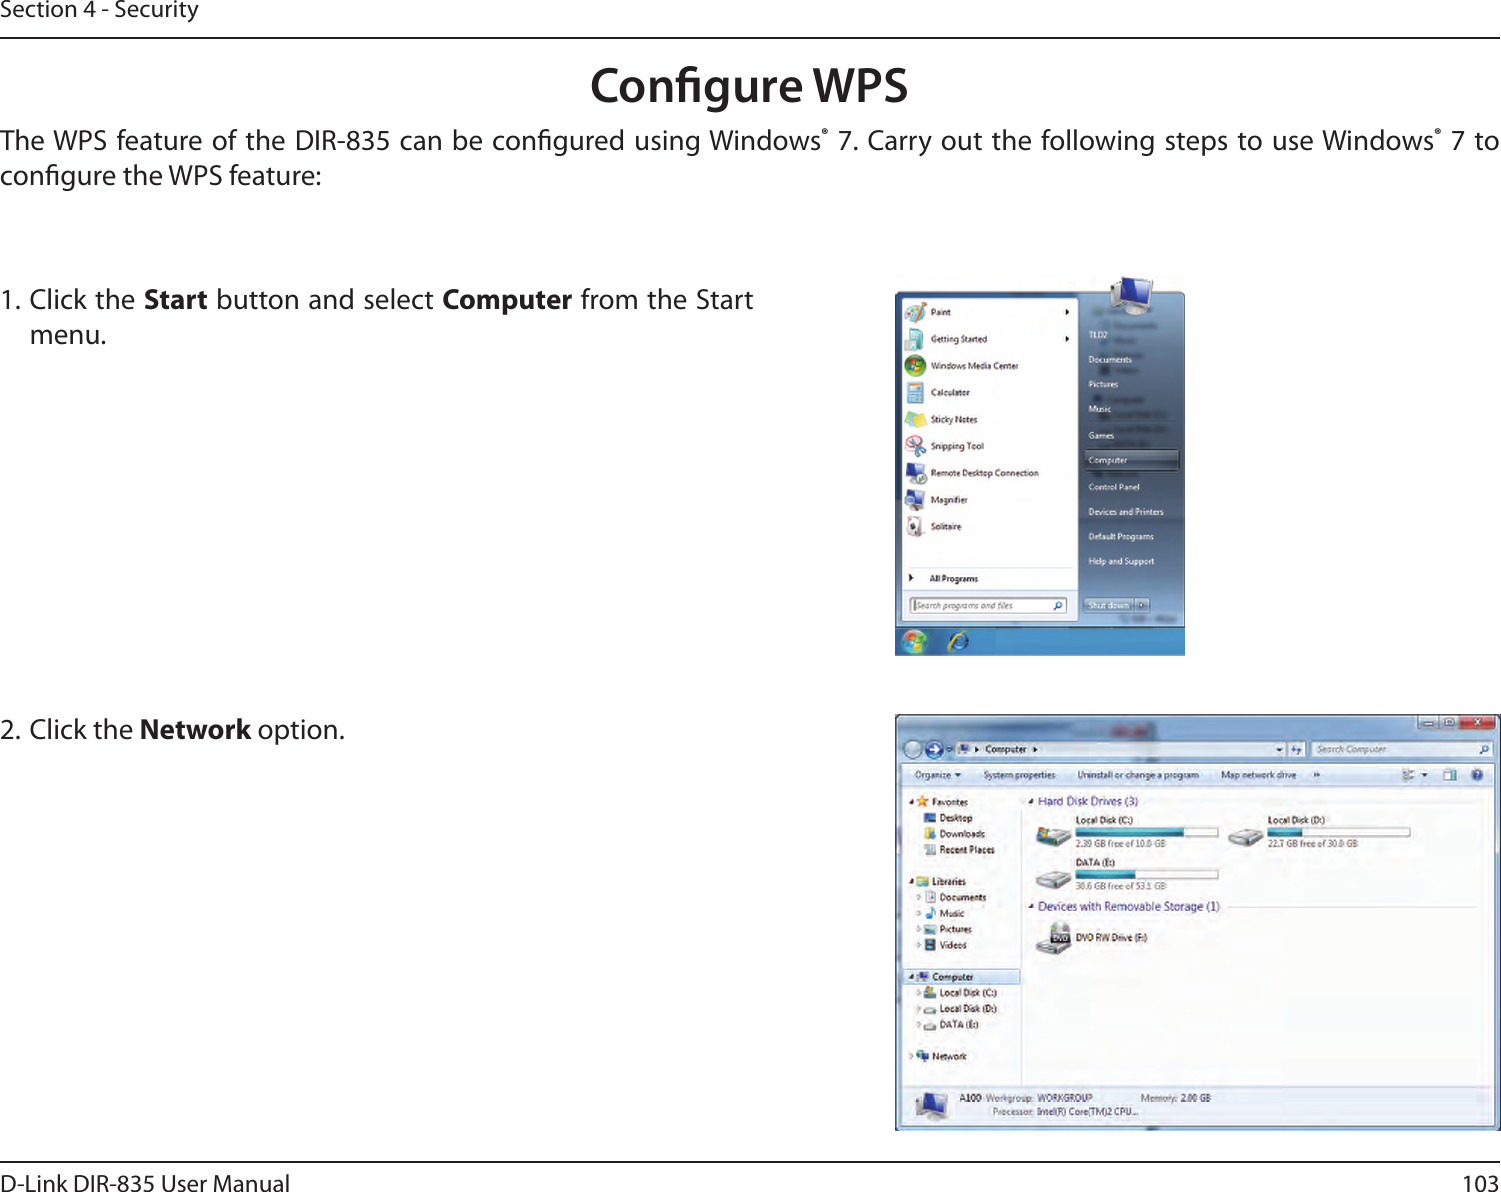 103D-Link DIR-835 User ManualSection 4 - SecurityCongure WPSThe WPS feature of the DIR-835 can be congured using Windows® 7. Carry out the following steps to use Windows® 7 to congure the WPS feature:1. Click the Start button and select Computer from the Start menu.2. Click the Network option.